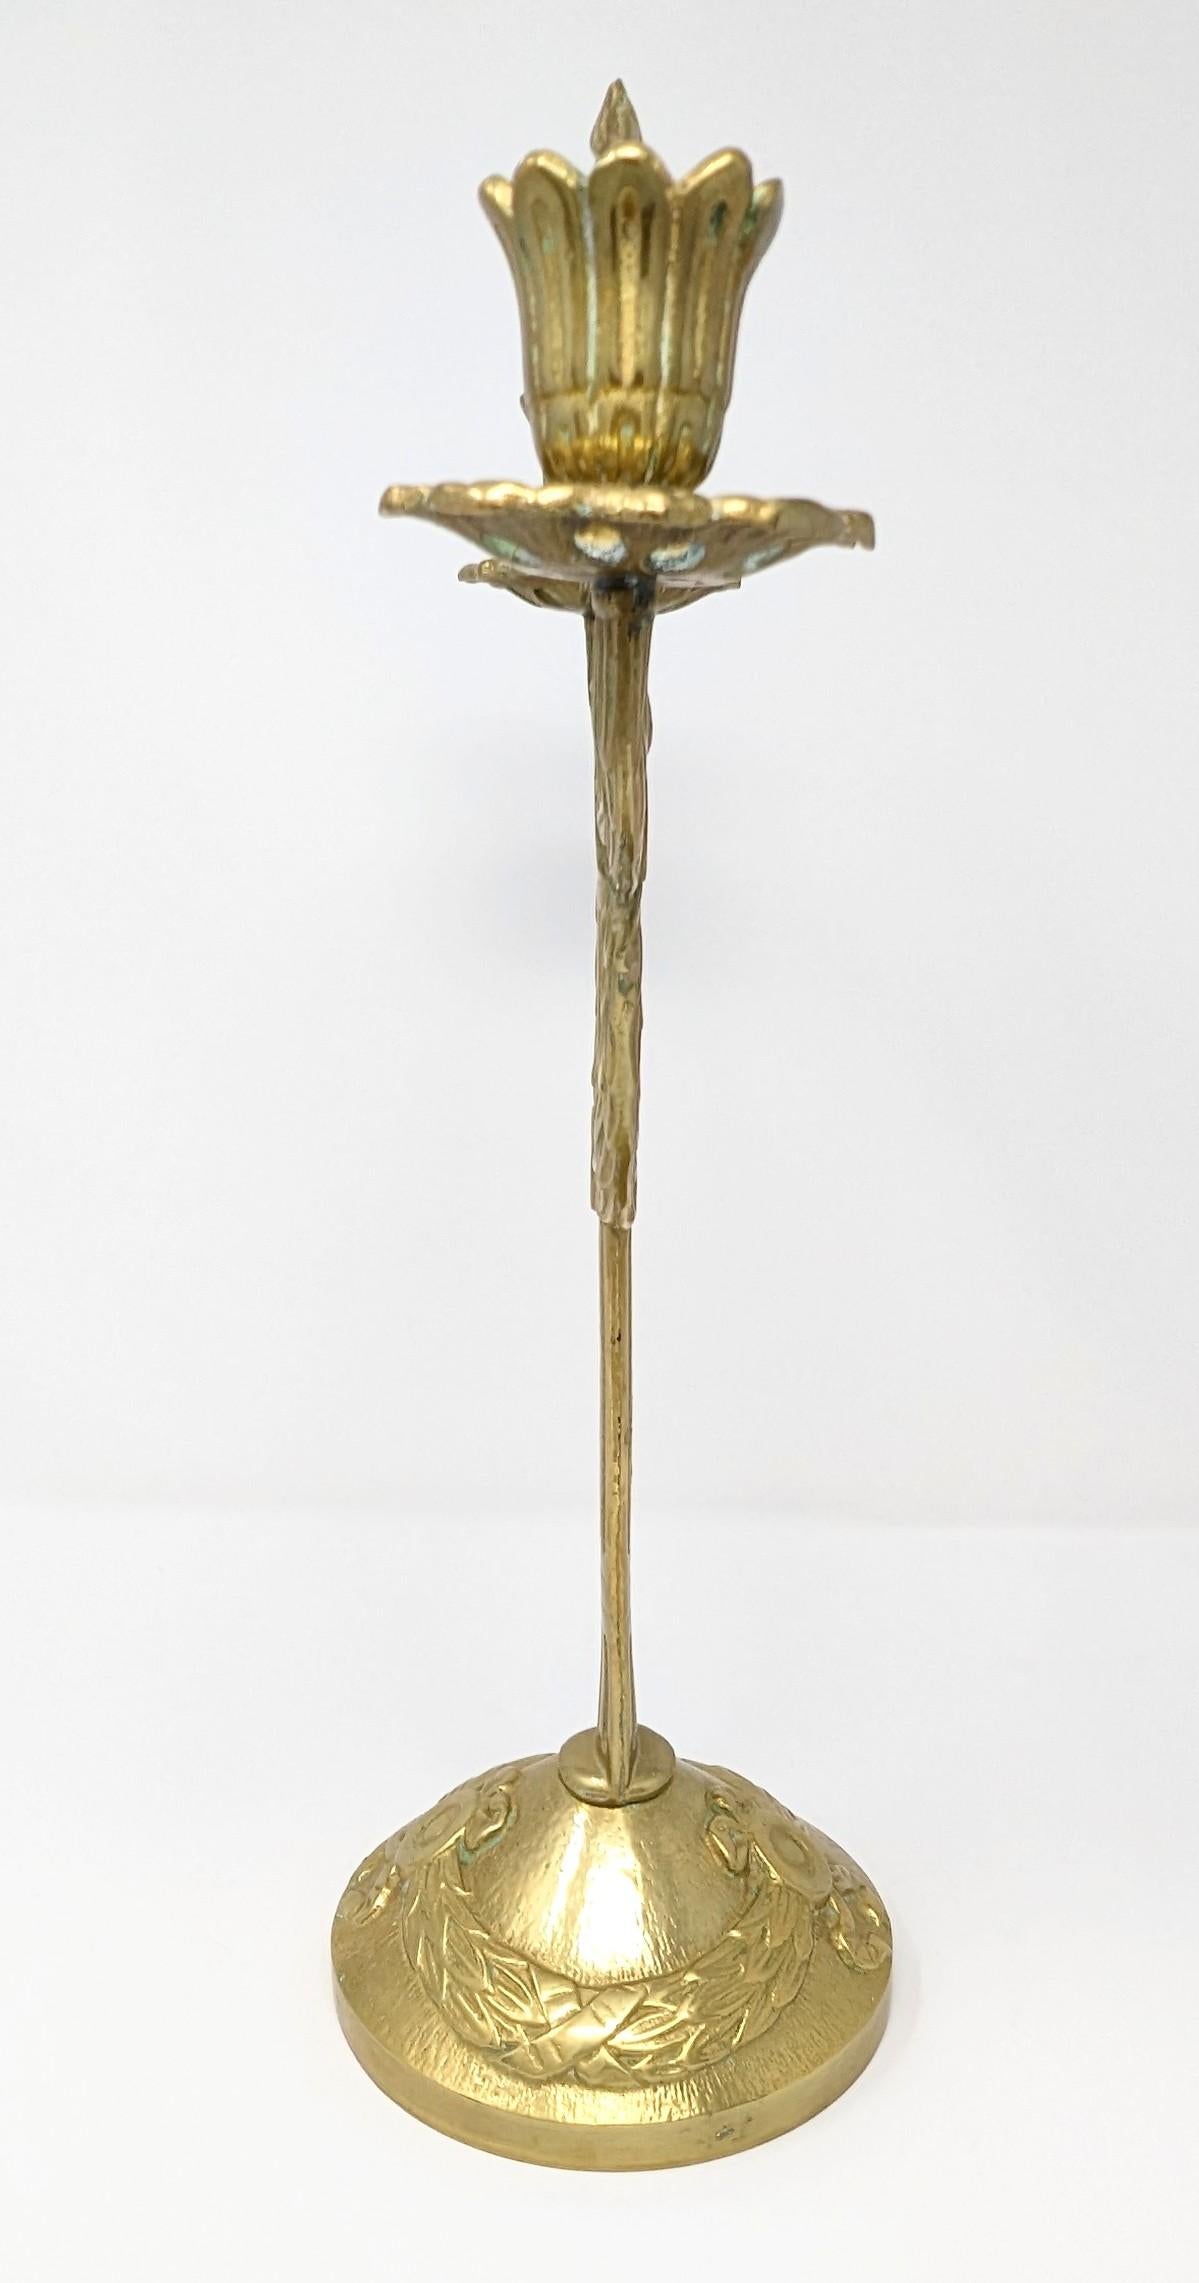 Antique Brass Candelabra Two Arm Candlestick w/ Classical Ribbon & Wreath Design In Good Condition For Sale In Greer, SC